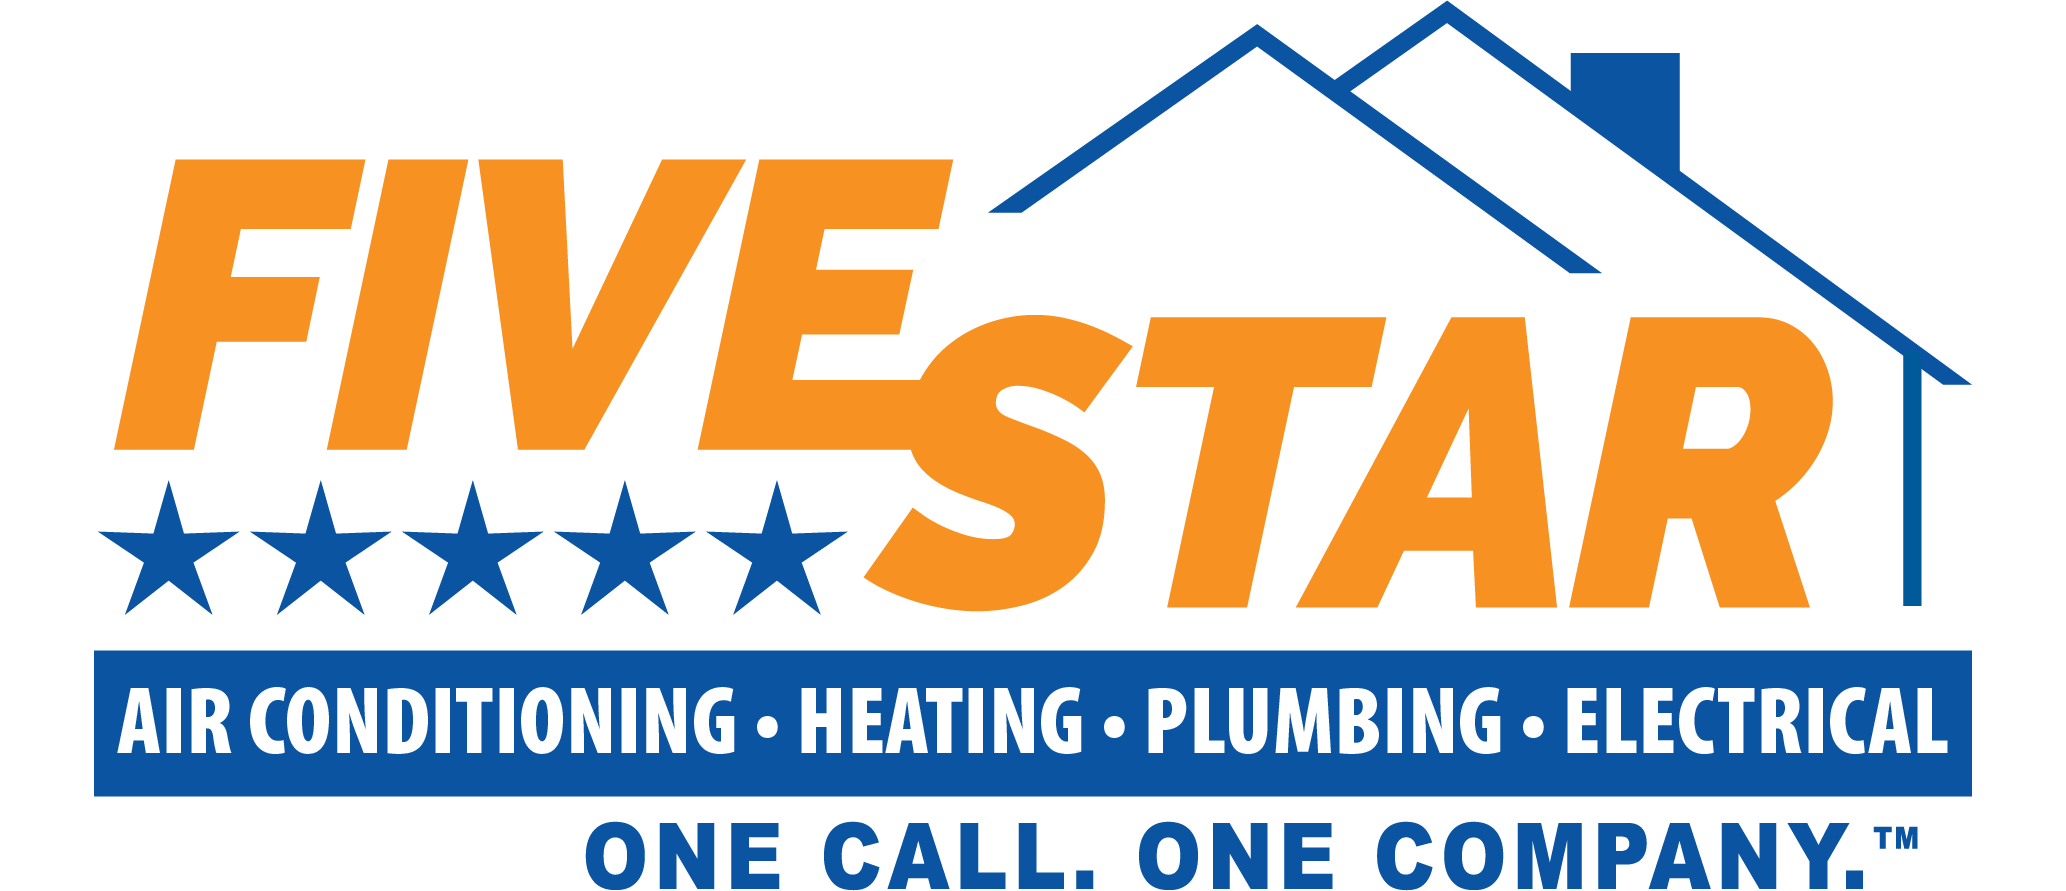 Five Star Plumbing Heating Cooling Electric